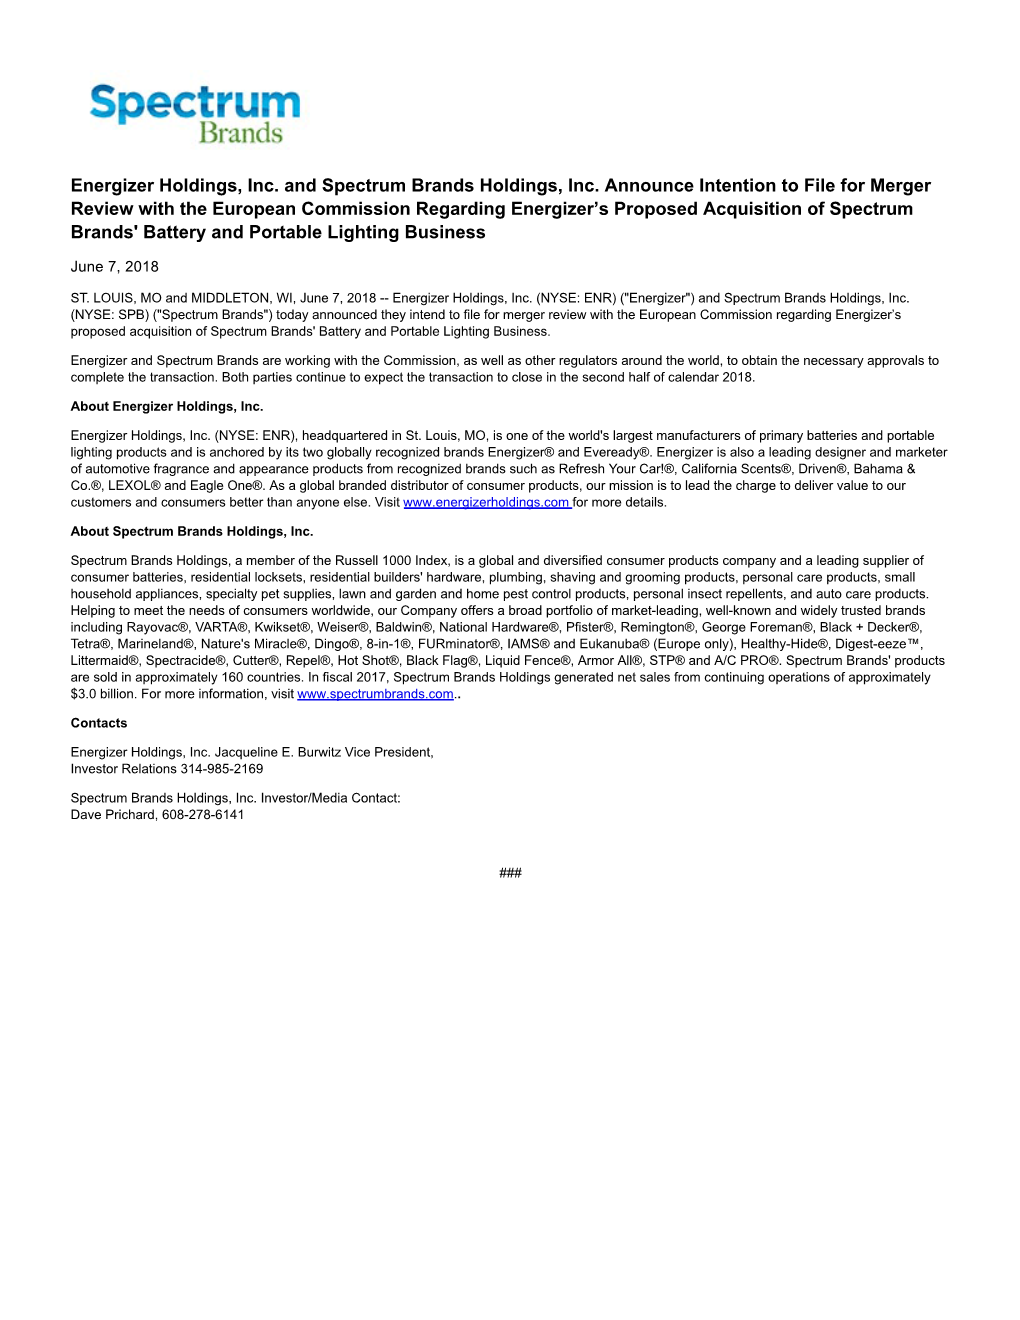 Energizer Holdings, Inc. and Spectrum Brands Holdings, Inc. Announce